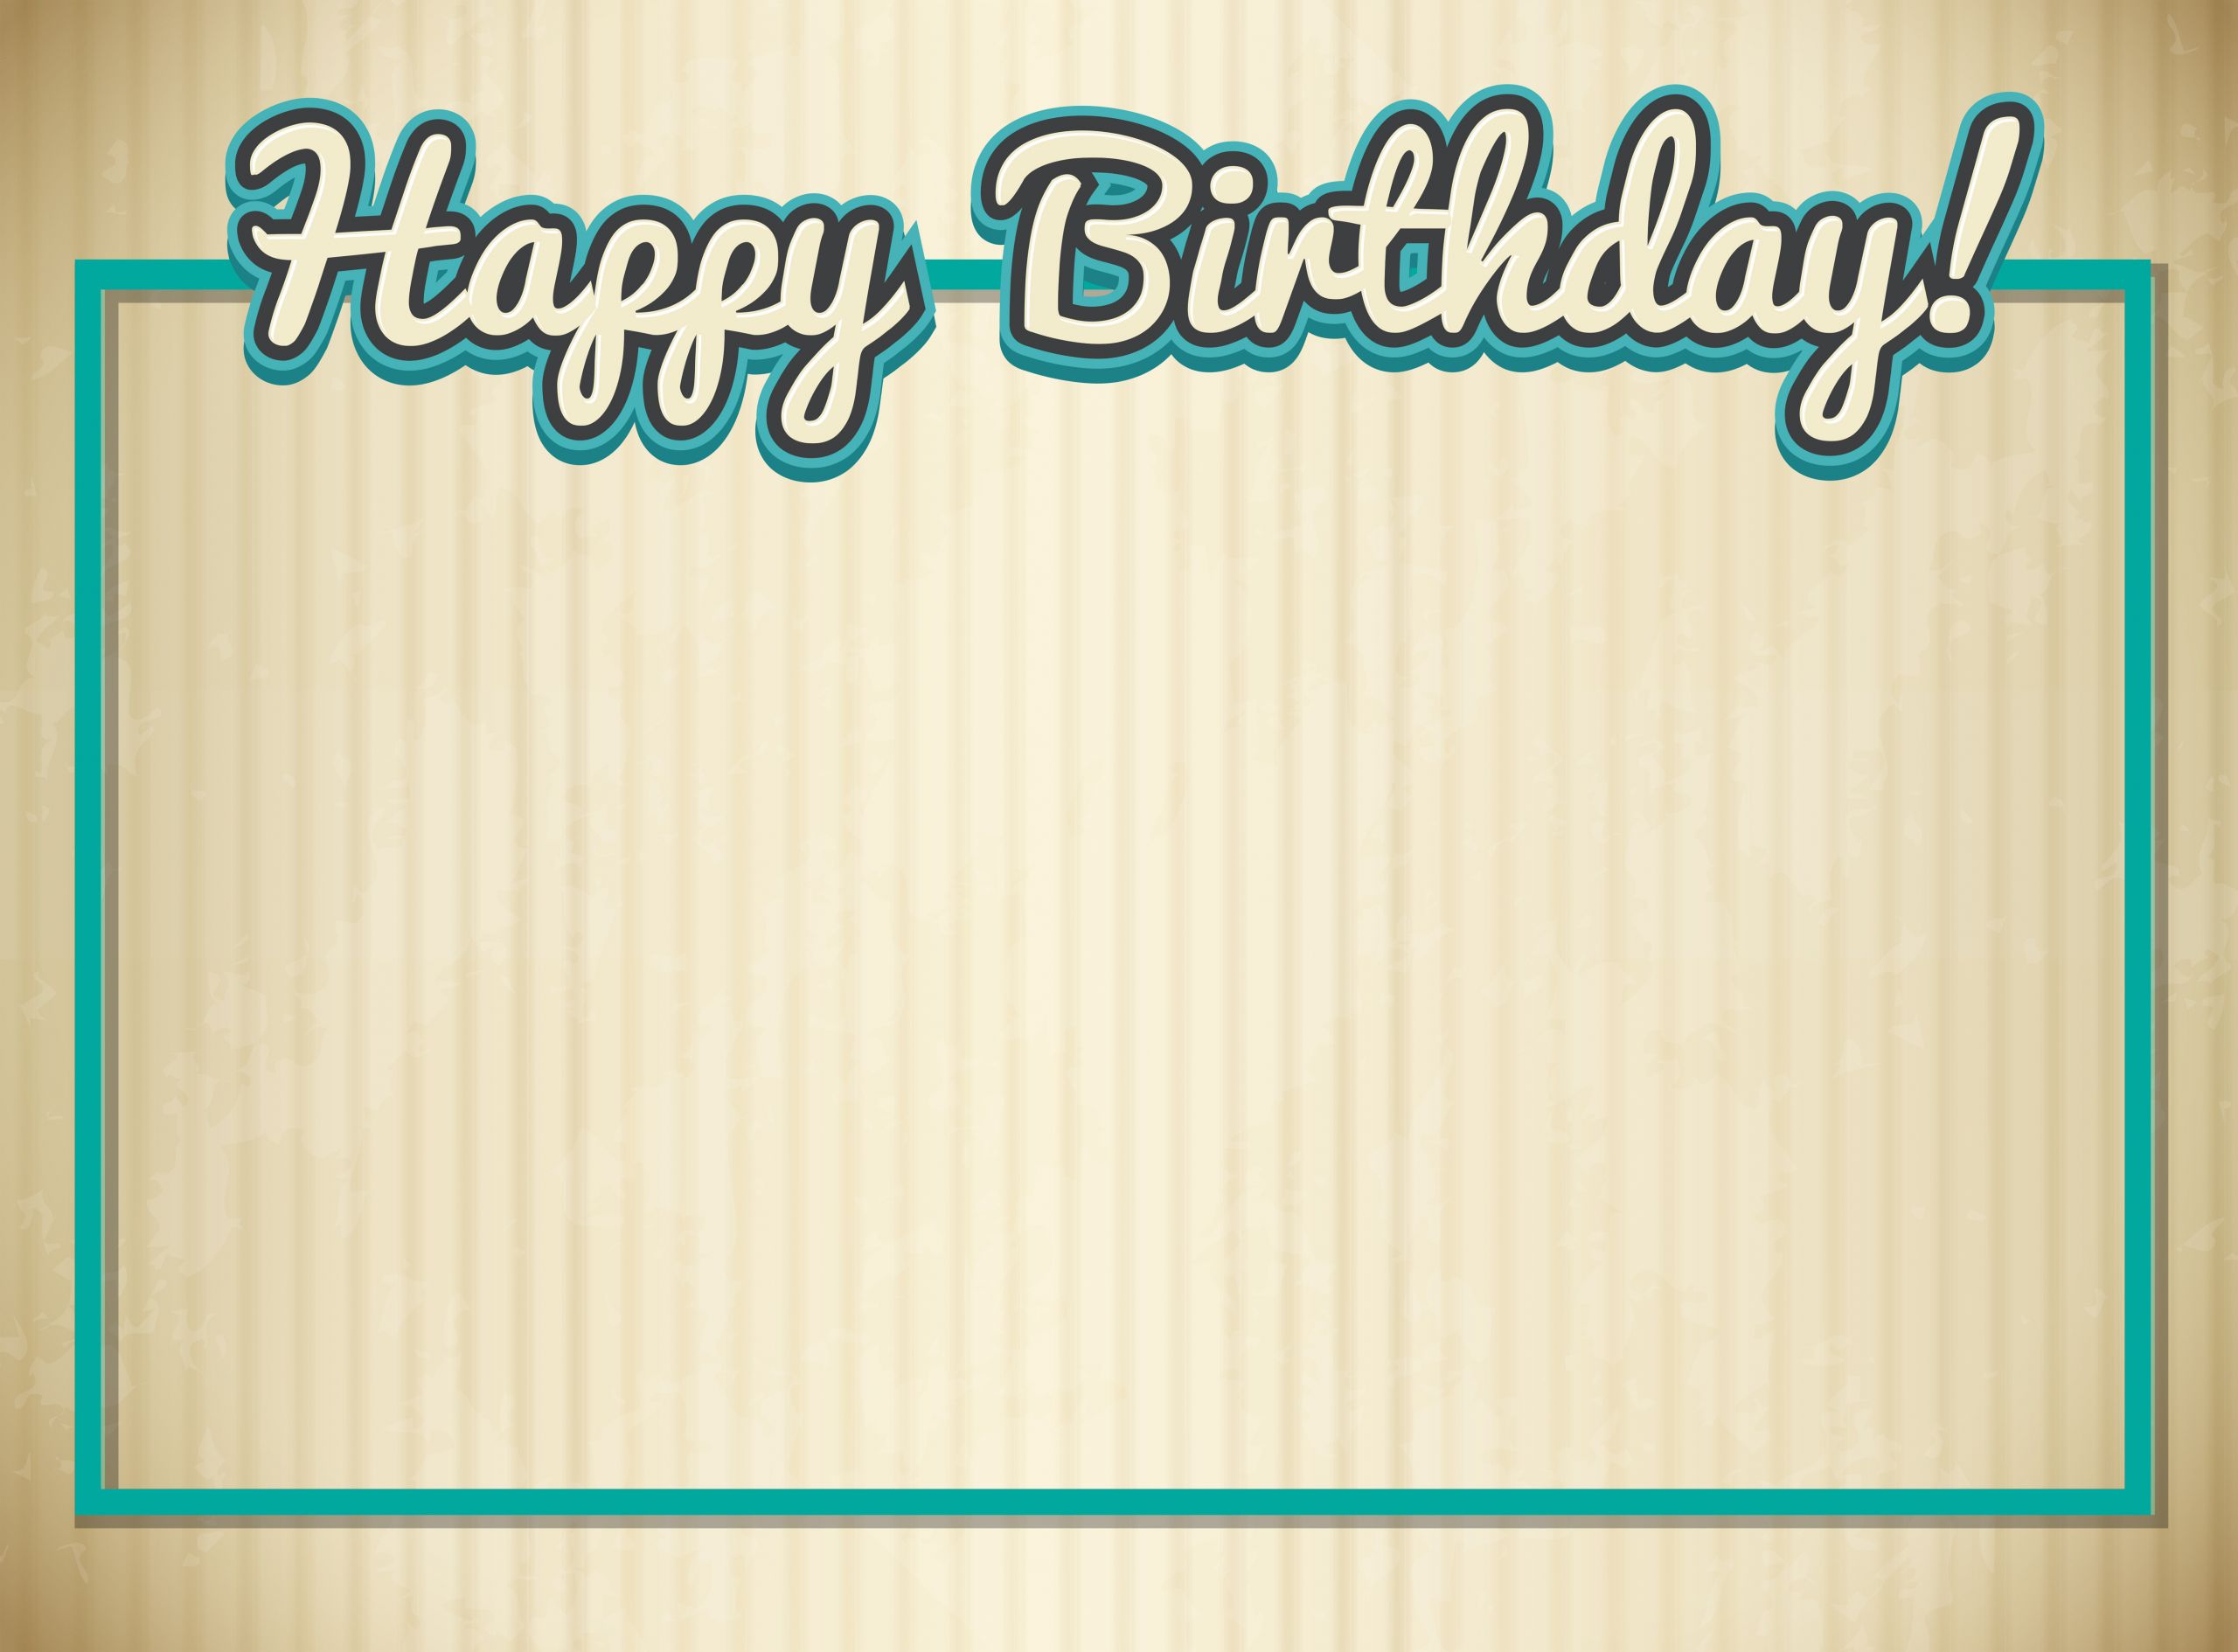 Blank Birthday Cards
 Blank birthday card template Download Free Vectors